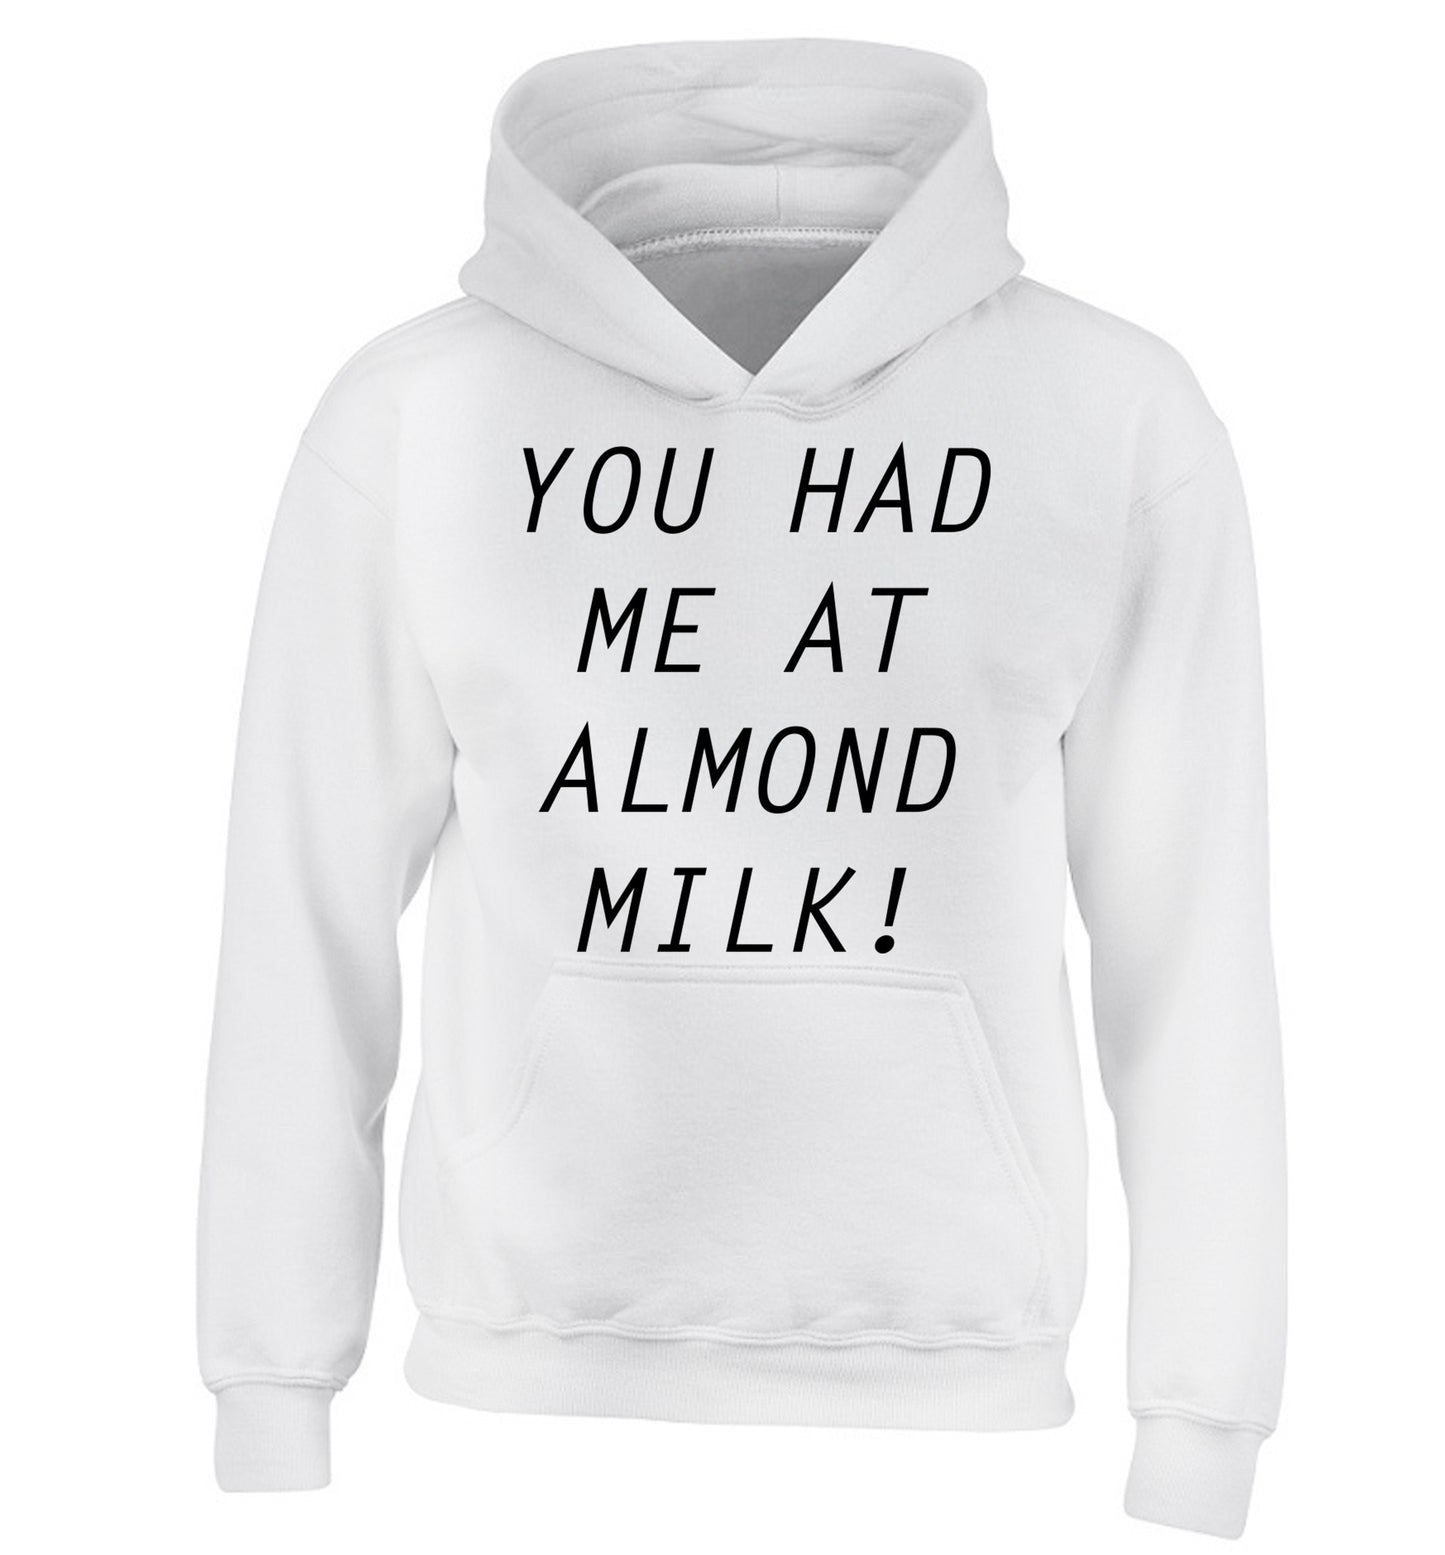 You had me at almond milk children's white hoodie 12-14 Years